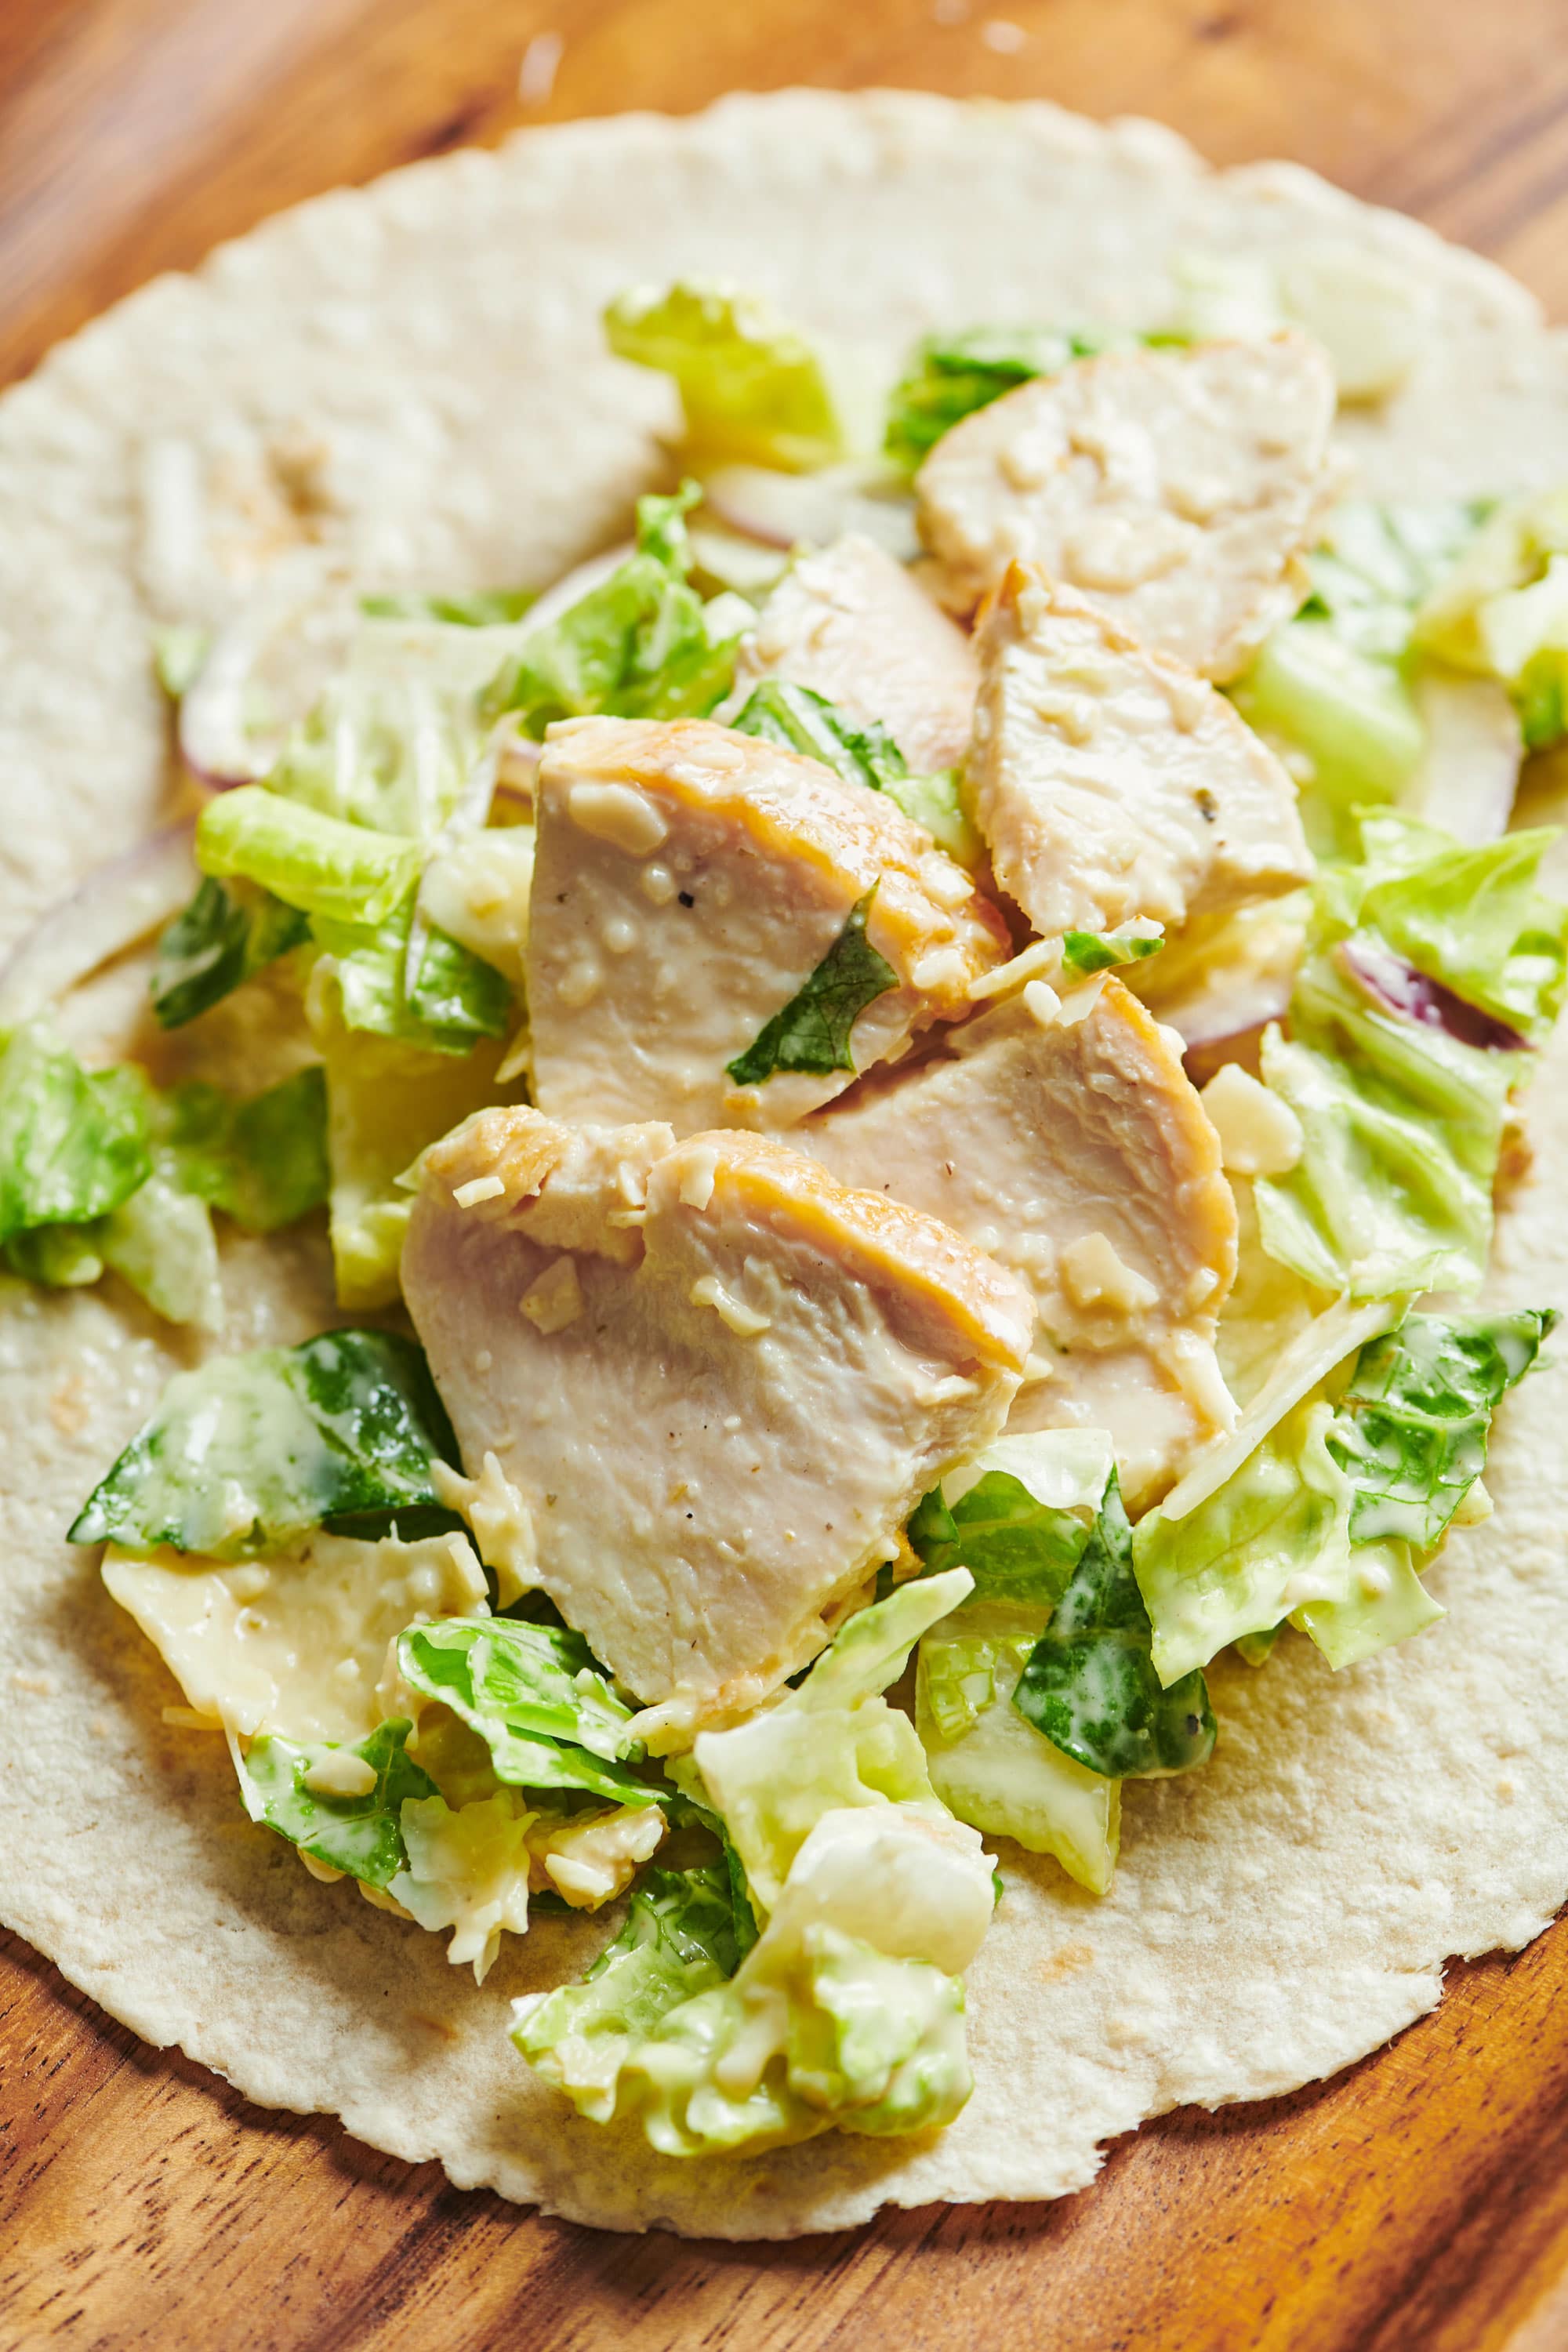 Grilled Chicken Caesar Salad filling on a wrap.